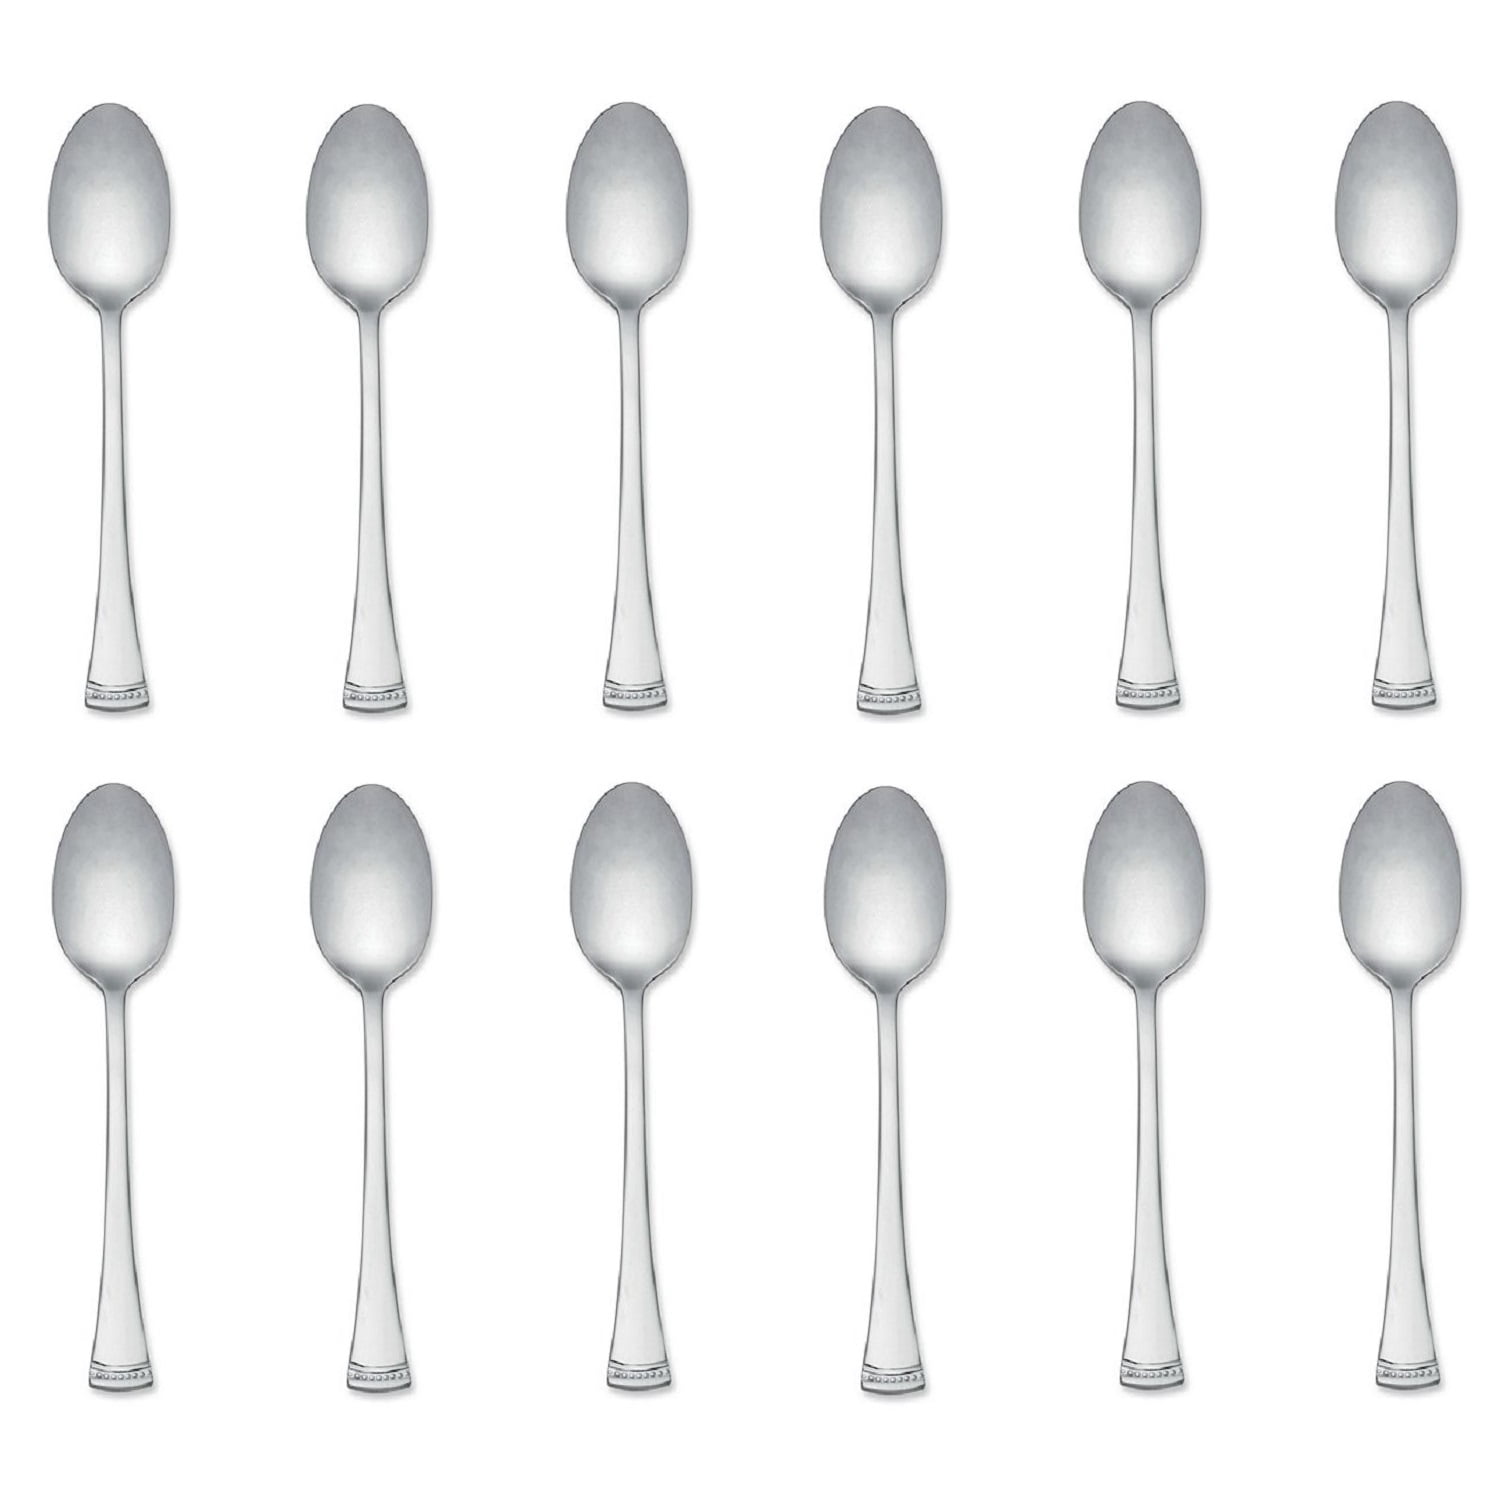 12 AMERICAN  COLONIAL ICED TEA SPOONS  NEW 18/8 S/S  FREE SHIPPING USA ONLY 